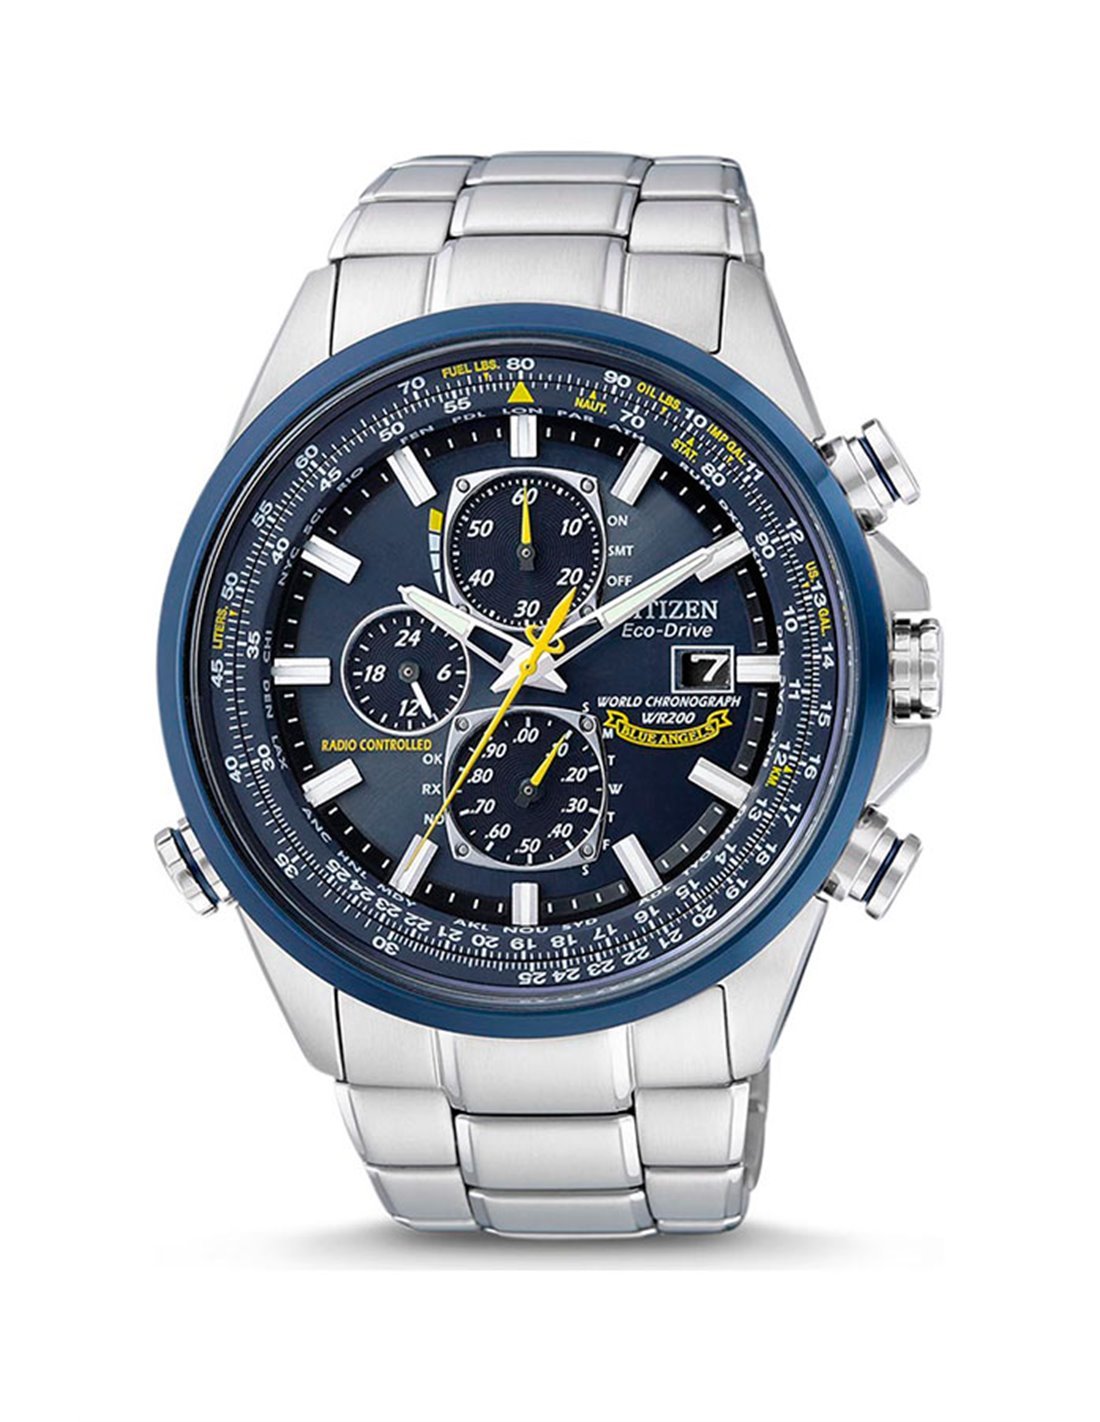 AT8020-54L | Citizen « H800 PROMASTER SKY BLUE ANGELS » AT8020-54L